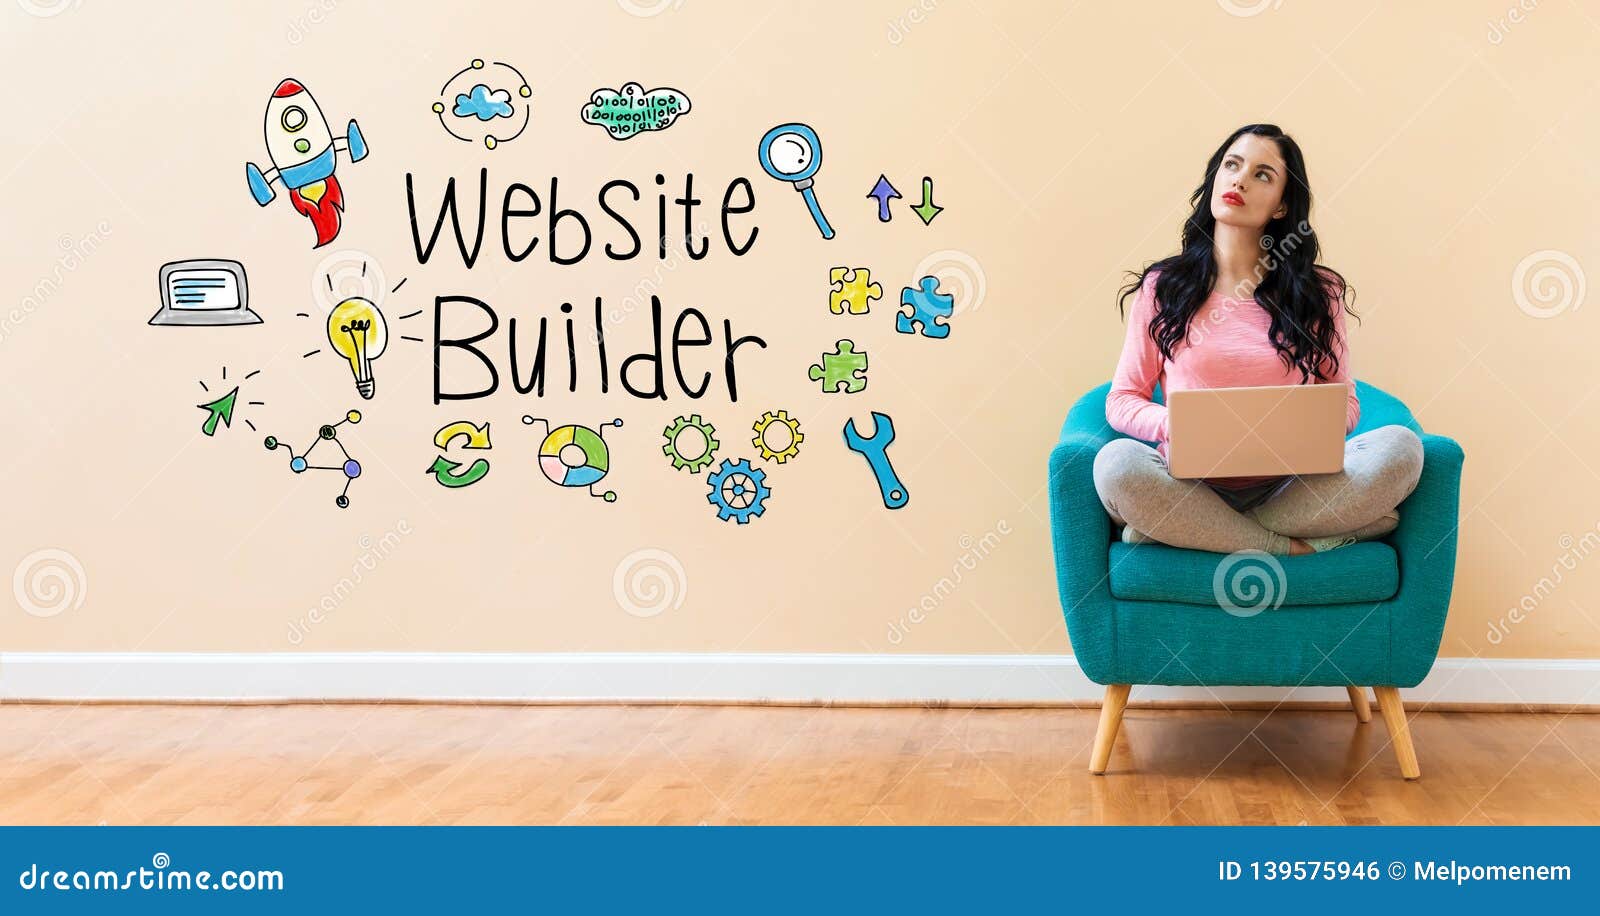 website builder with woman using a laptop